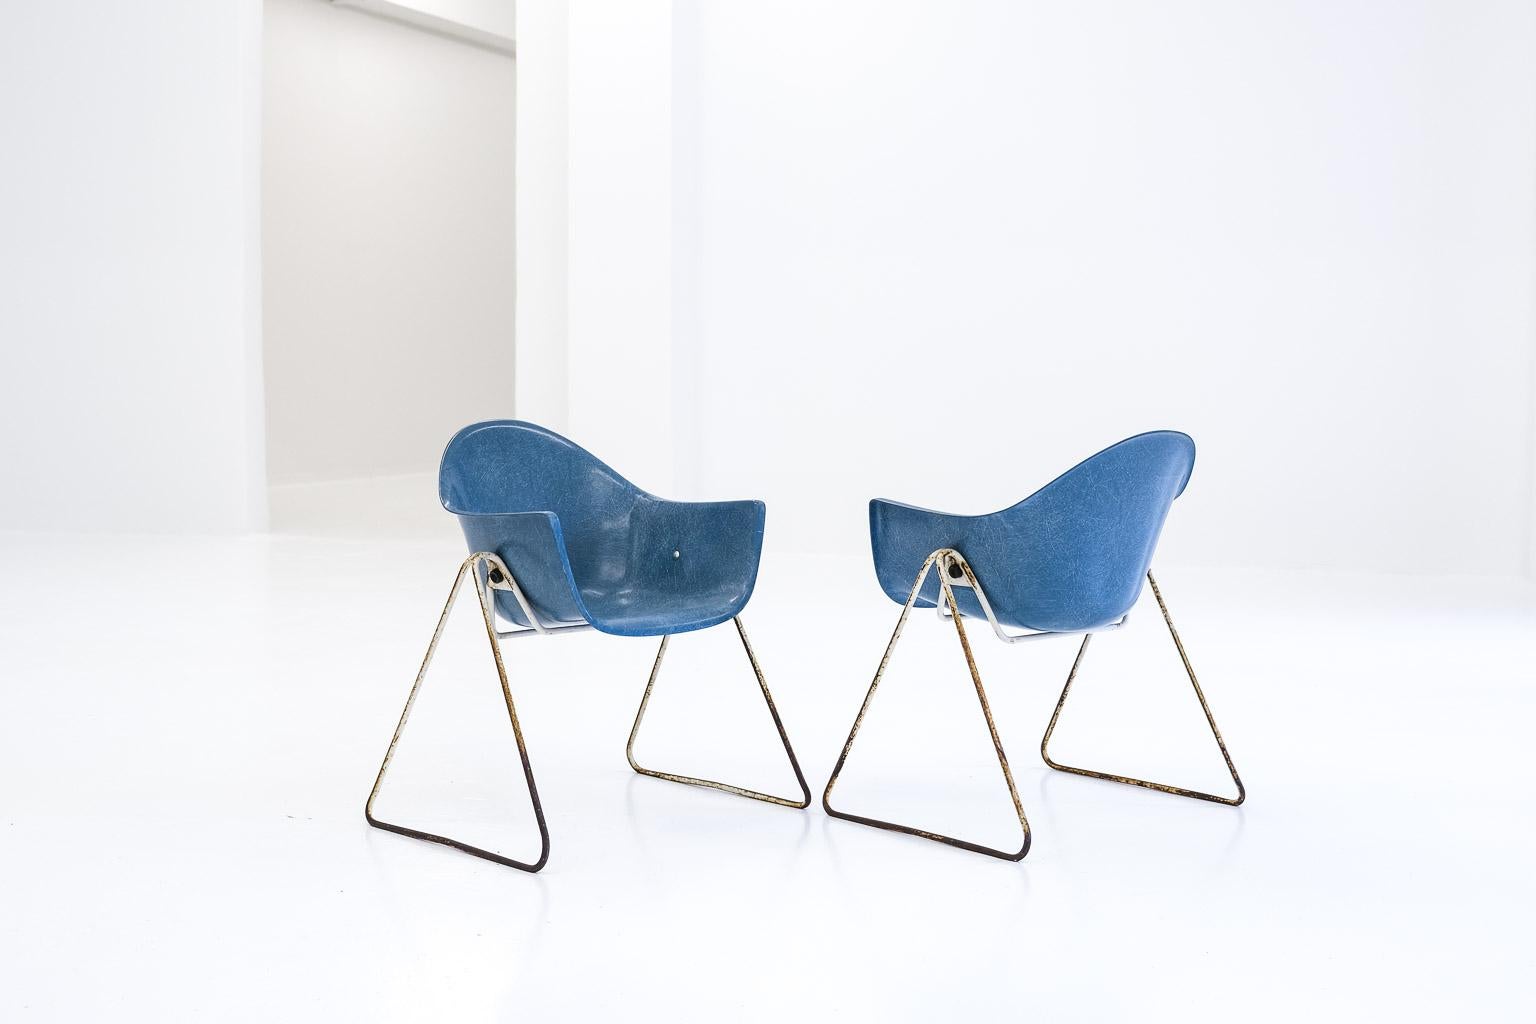 set for 2 children chairs 2015 by walter papst for wilkhahn. blue fiberglas and white steel tube frame with a distinct patina. 

here comes the whole story: 

„the harmonious design of this furniture makes the child familiar with good form from an